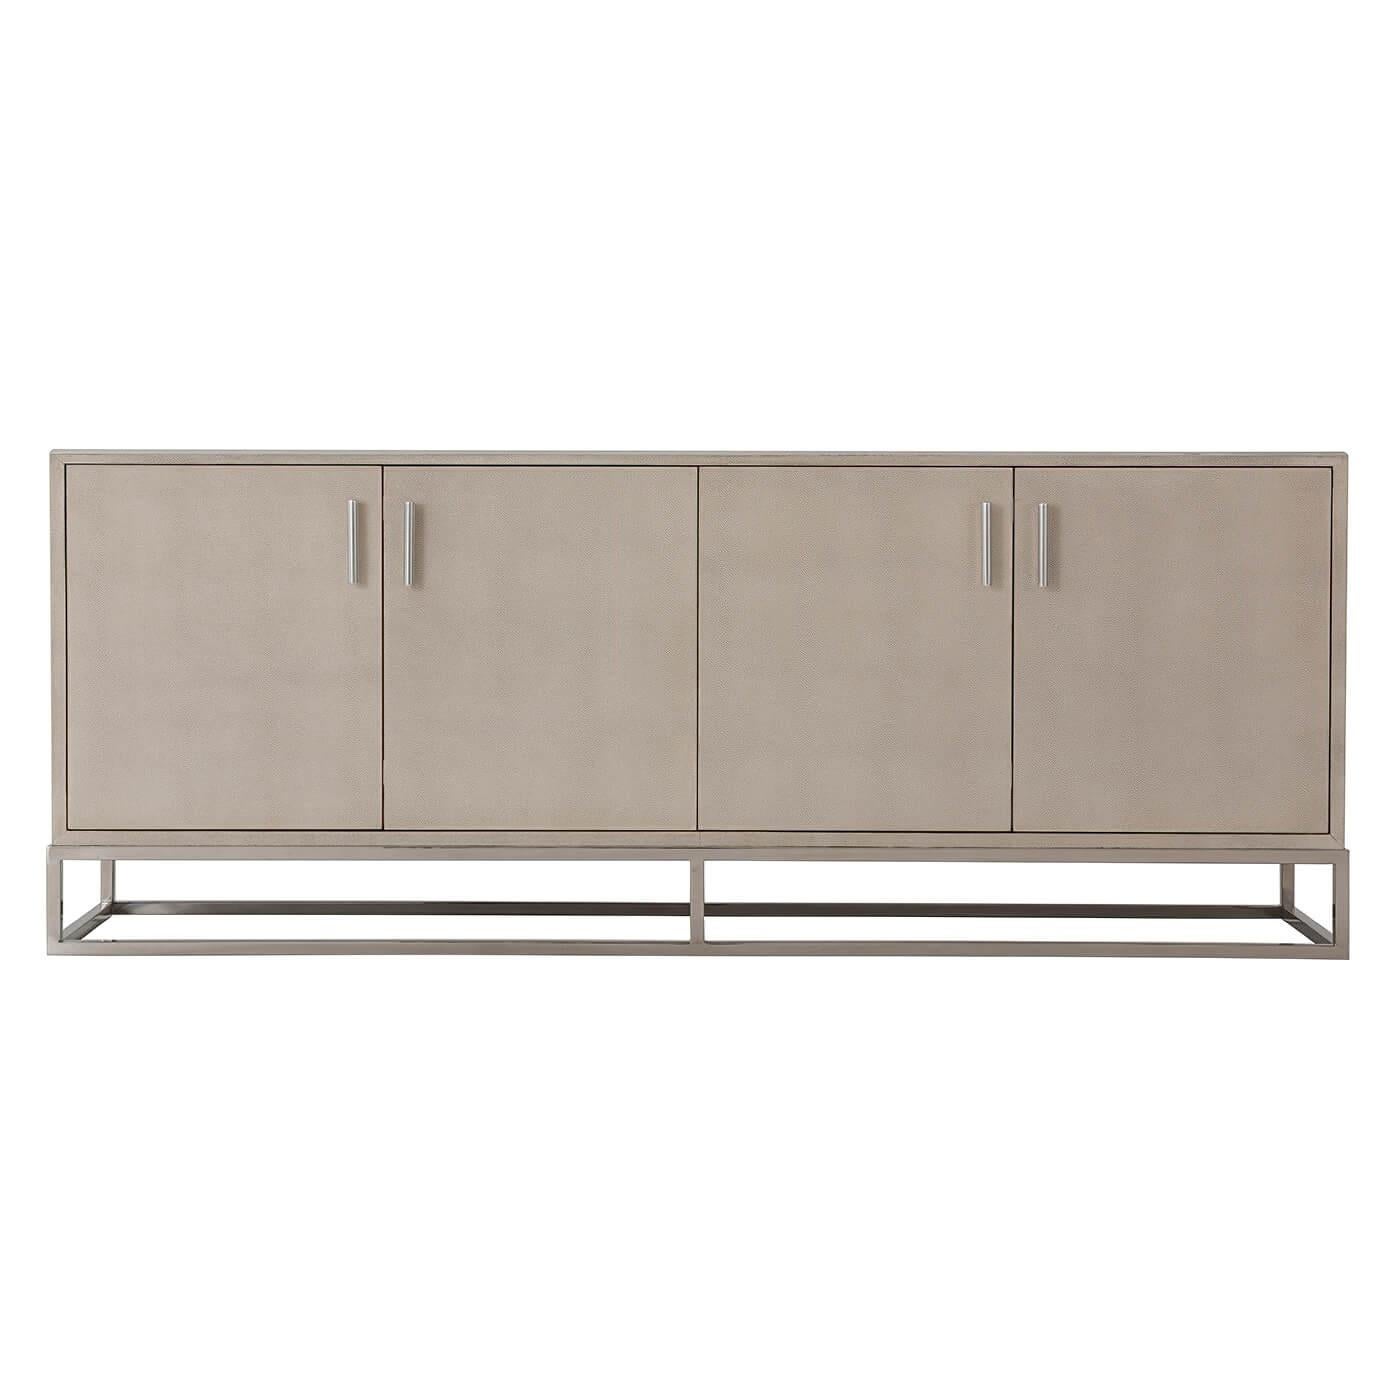 Modern leather wrapped media console. A shagreen embossed leather wrapped cabinet in an overcast finish with four cabinet doors enclosing shelves on a polished nickel open cube base with polished nickel molding and handles.

Dimensions: 70.75